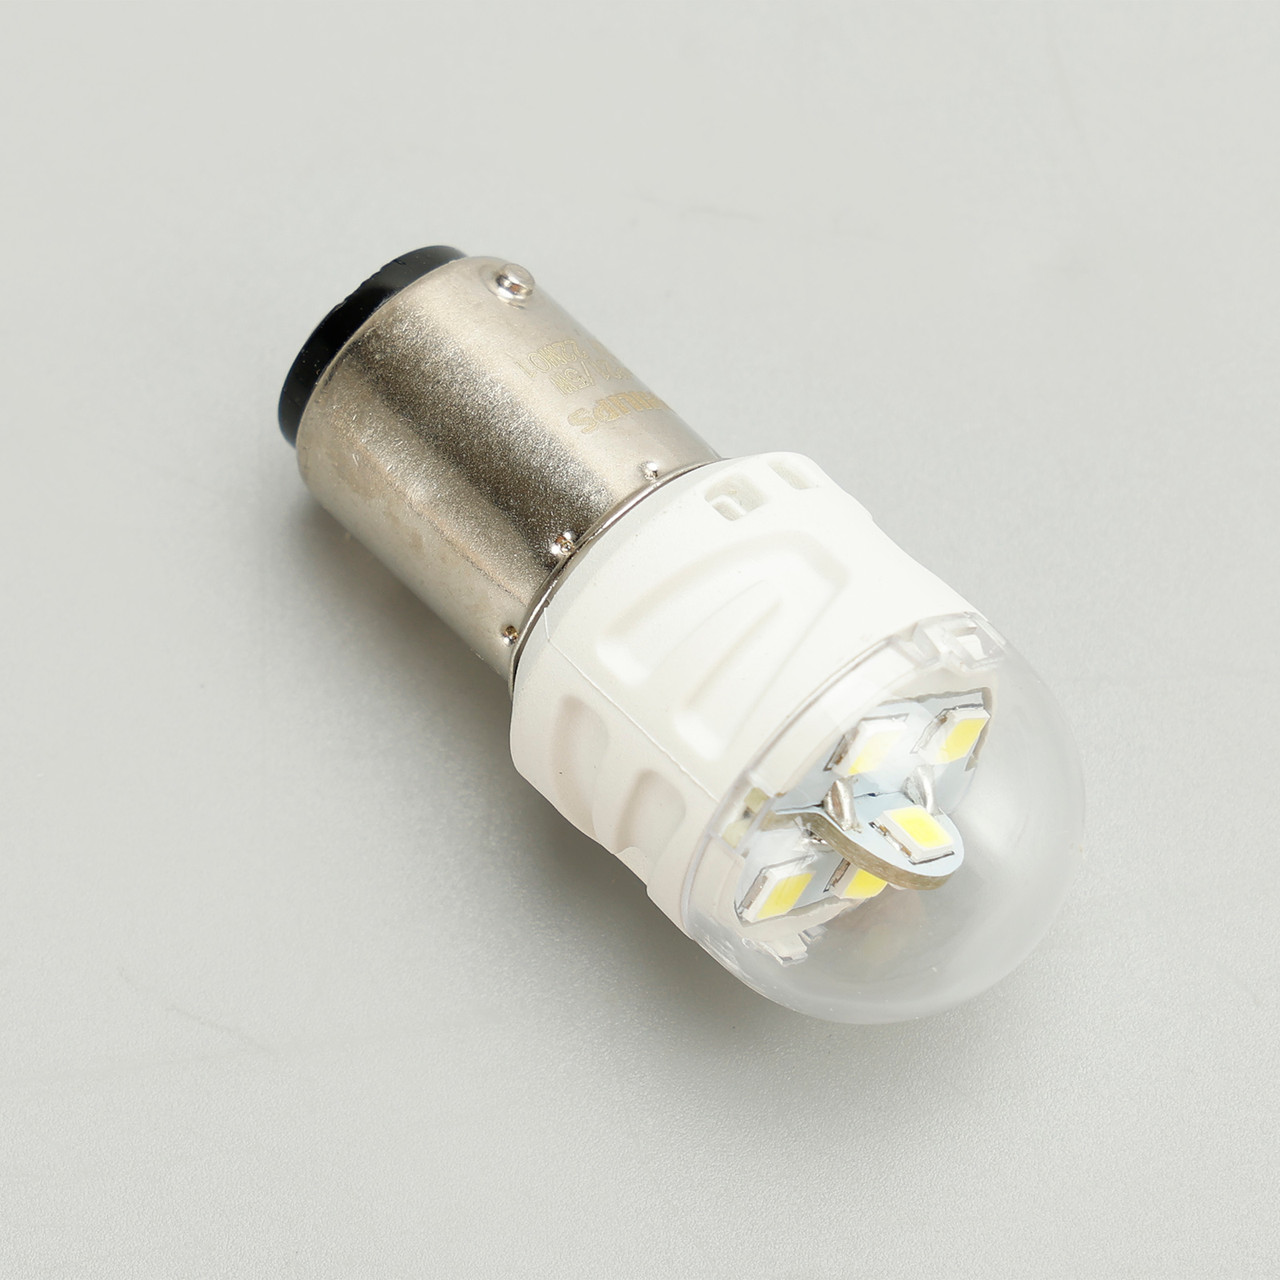 For Philips 11499CU31B2 Ultinon Pro3100 LED-WHITE P21/5W 6000K BAY15d